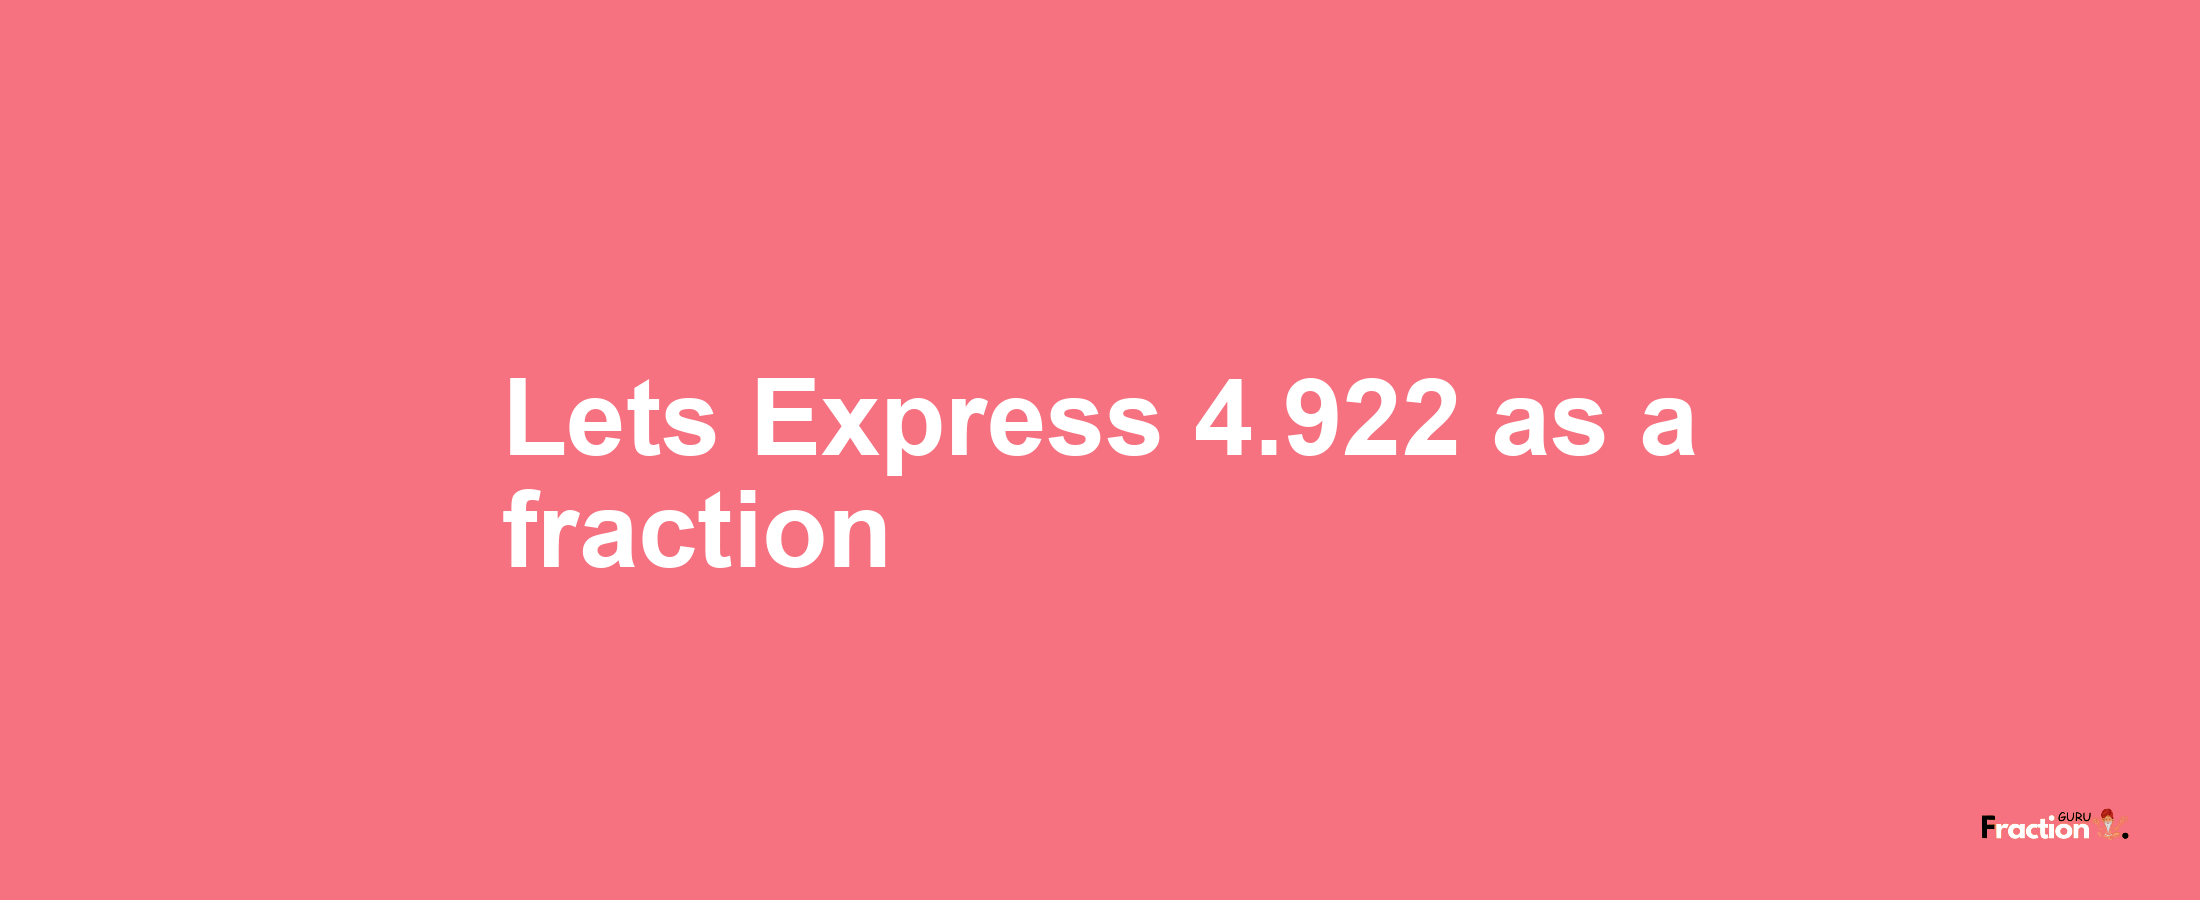 Lets Express 4.922 as afraction